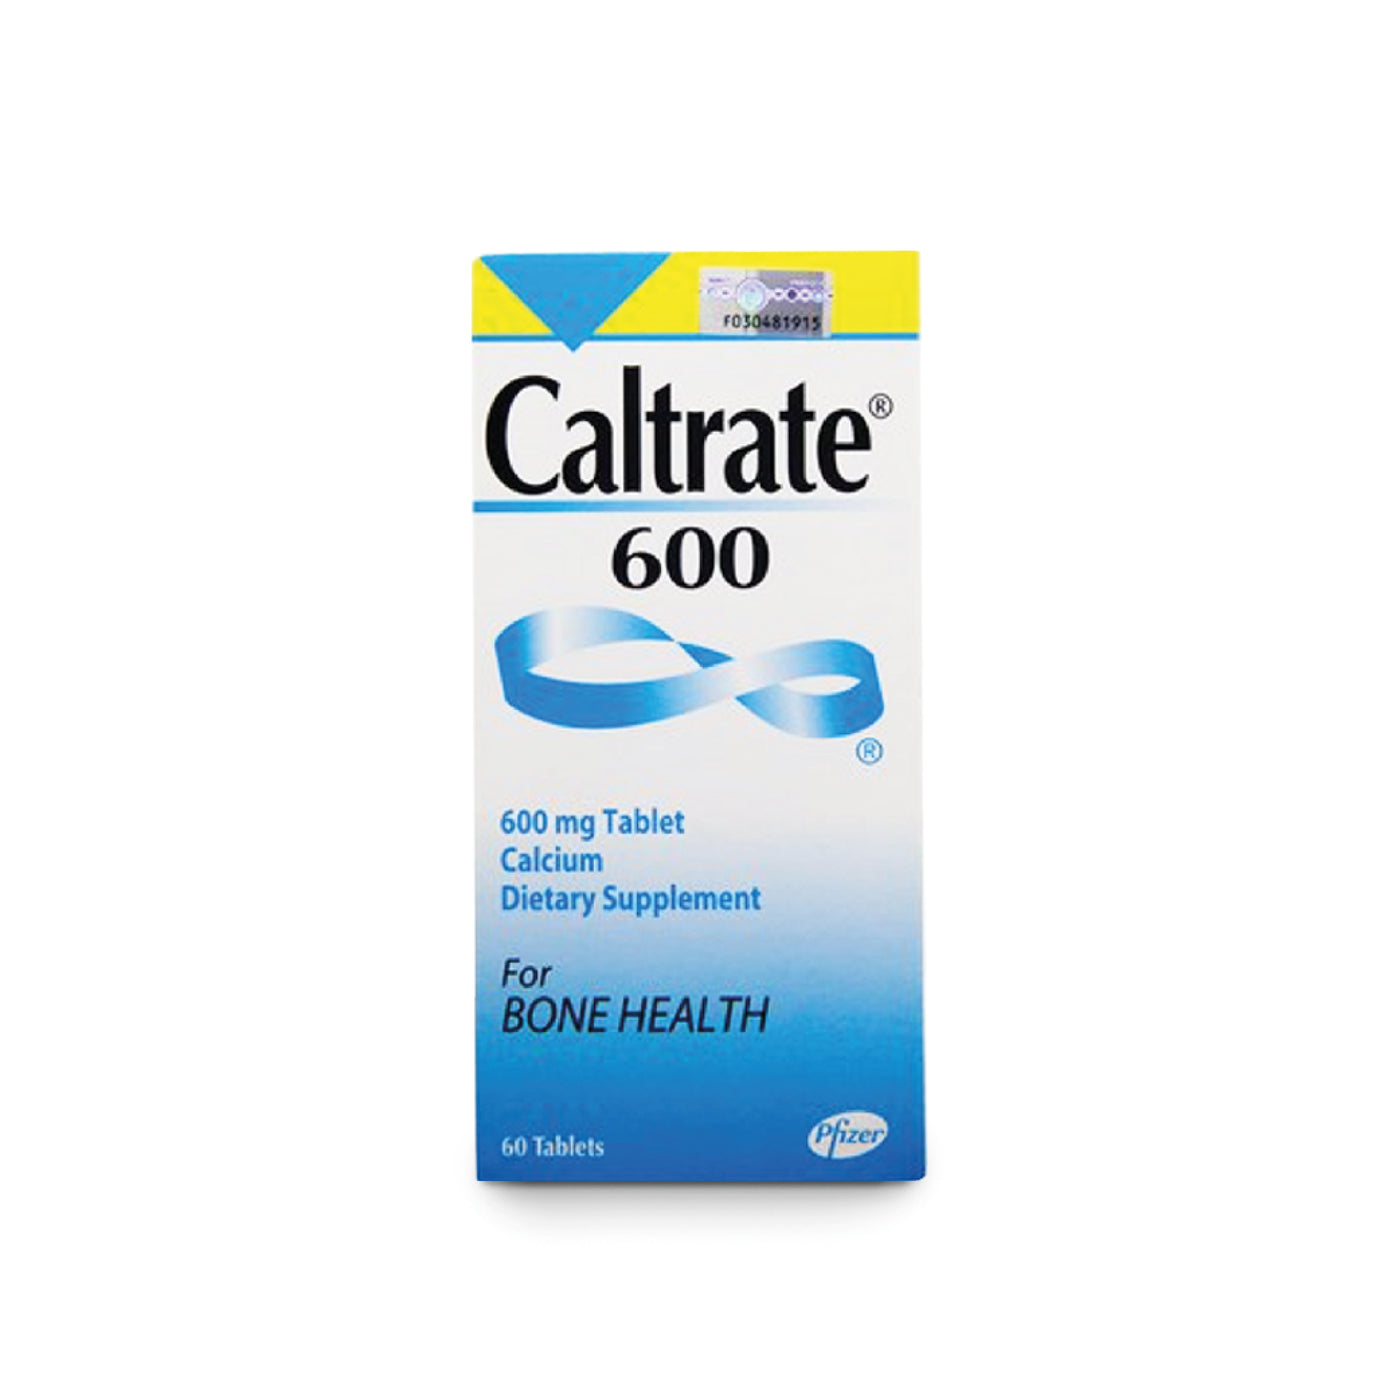 CALTRATE 600 TABLET 60's